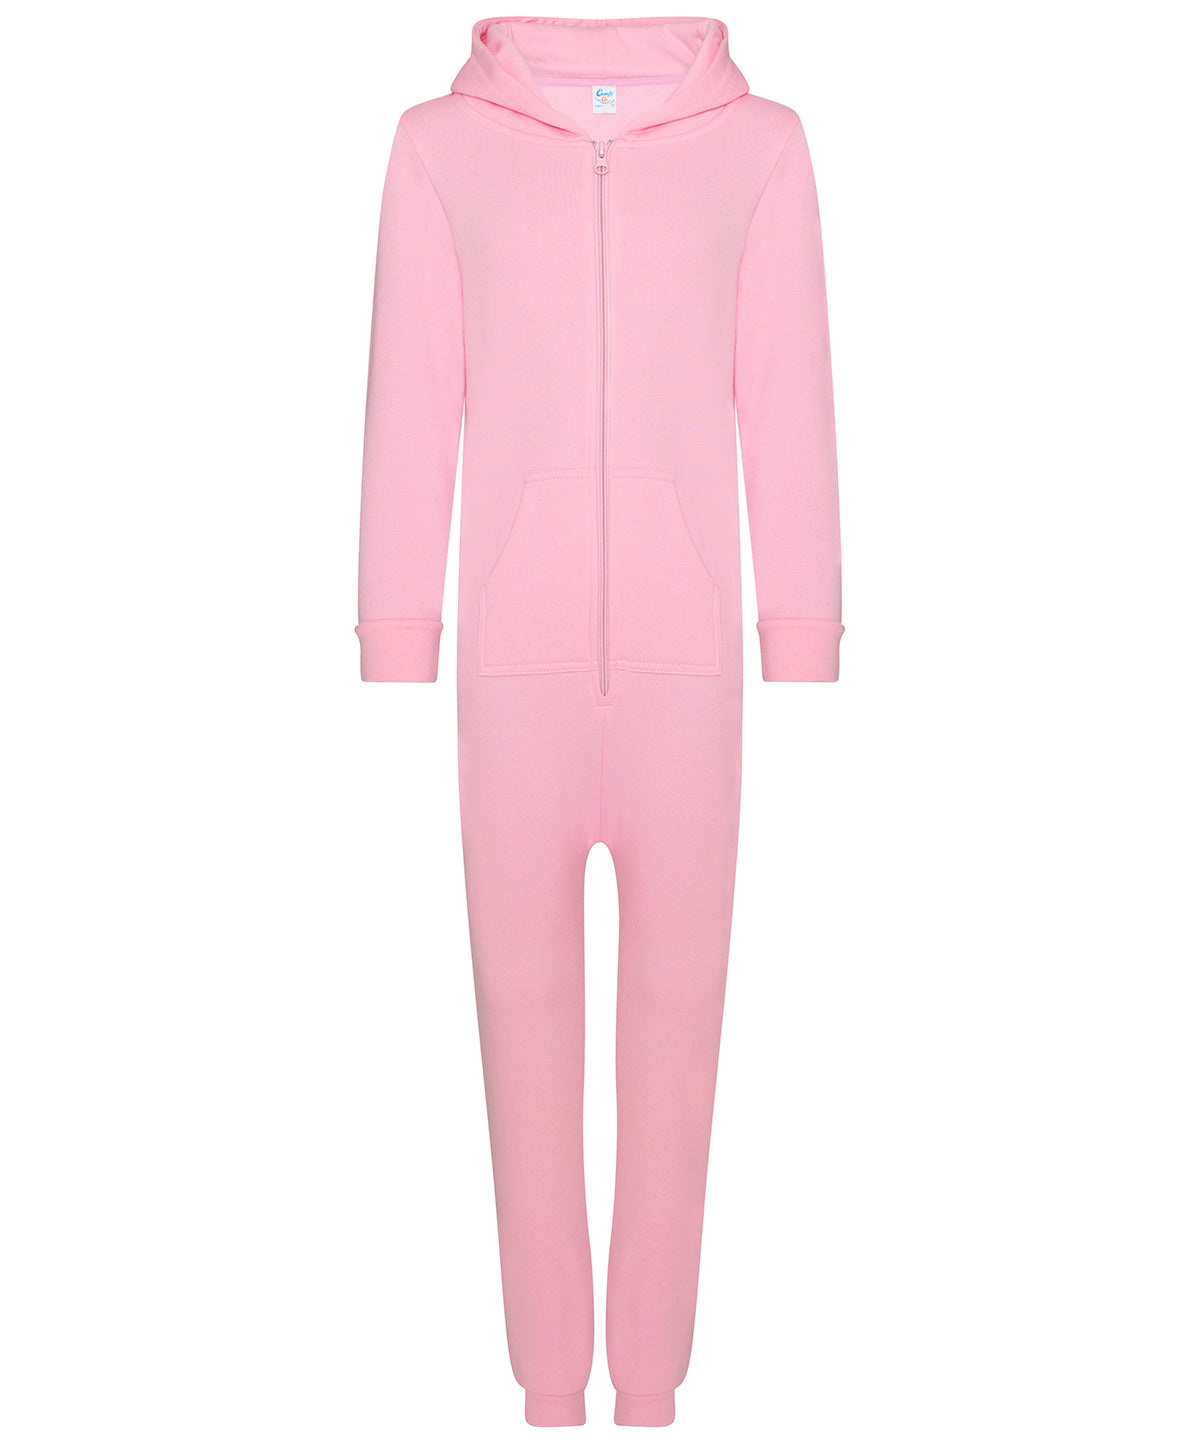 Personalised Onesies - Light Pink Comfy Co Kids all-in-one